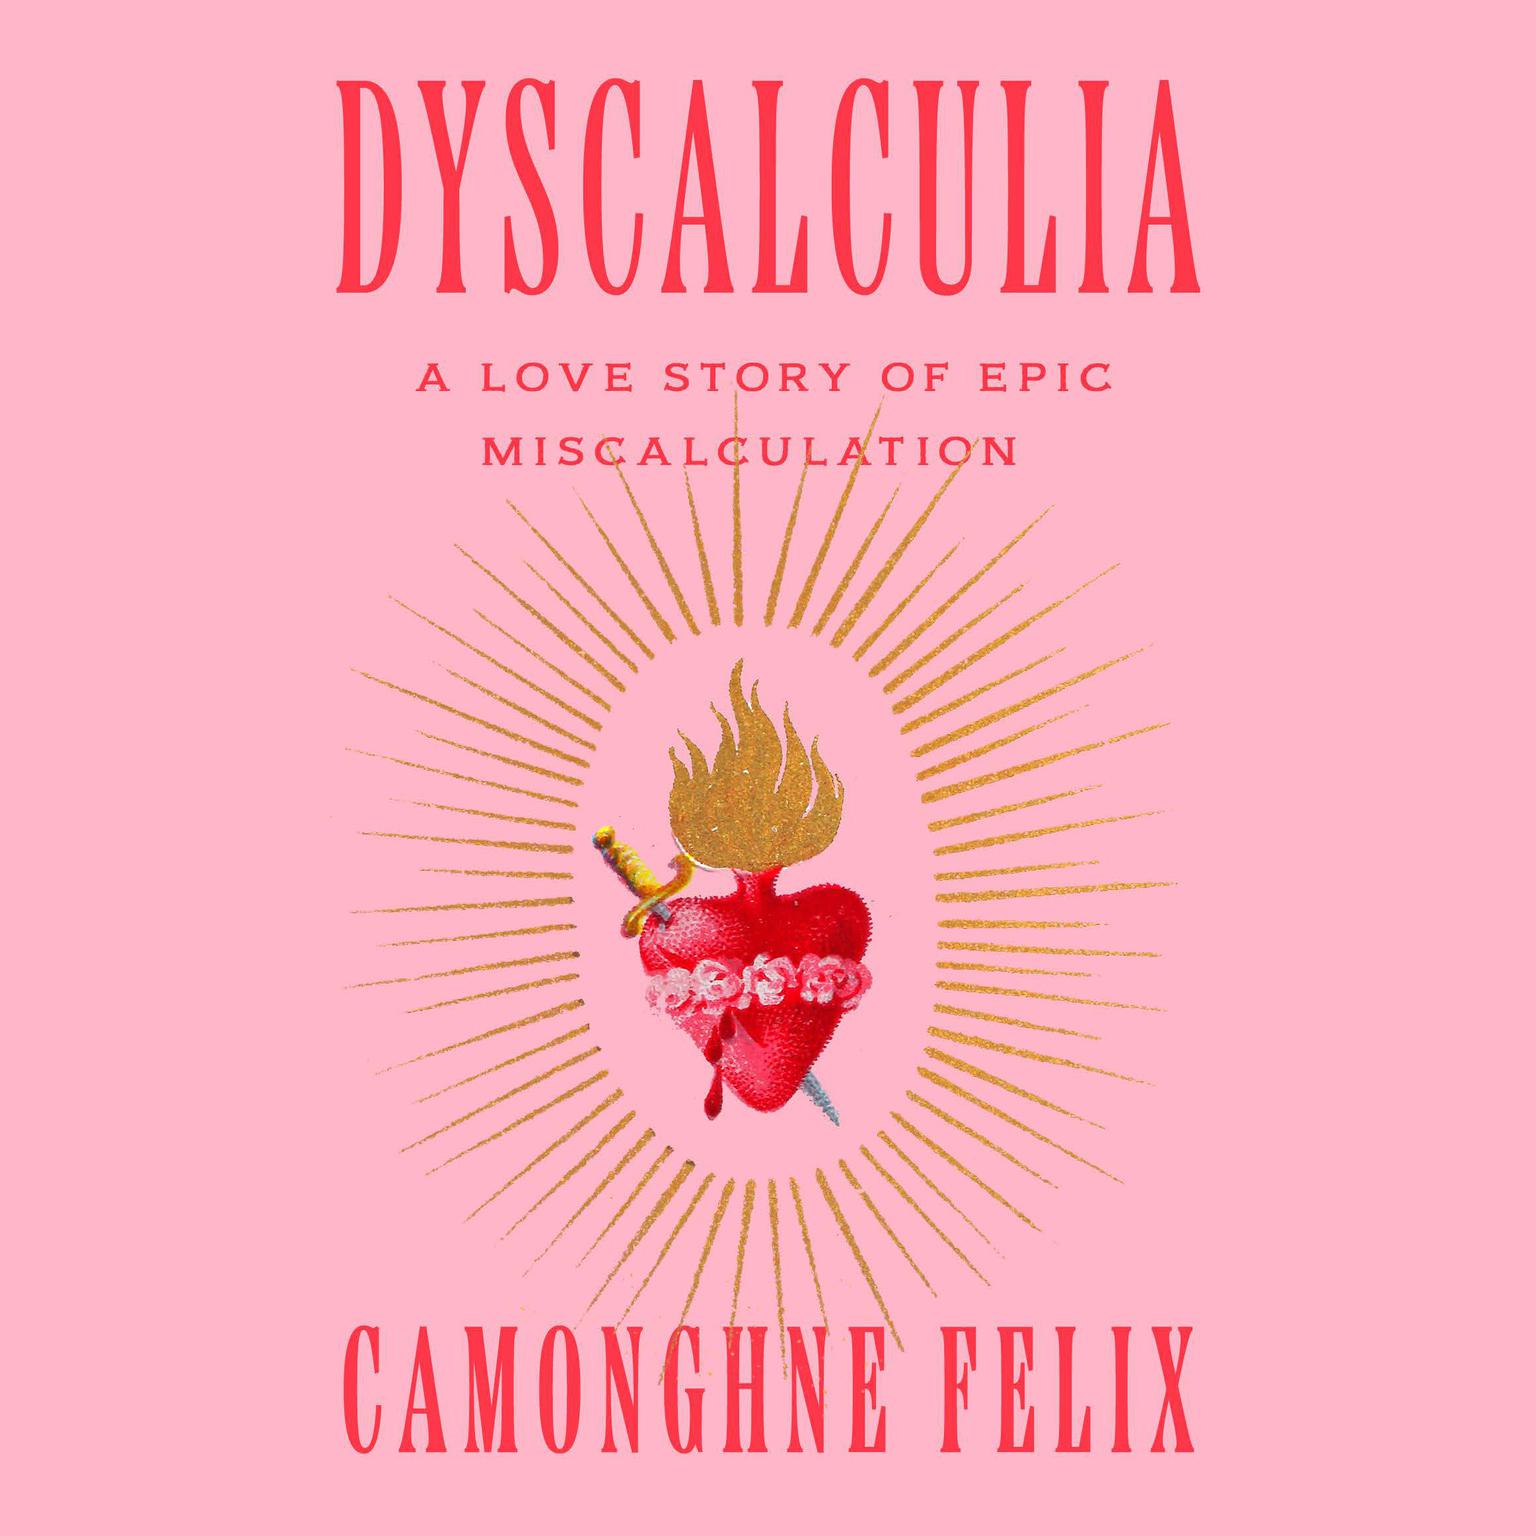 Dyscalculia: A Love Story of Epic Miscalculation Audiobook, by Camonghne Felix